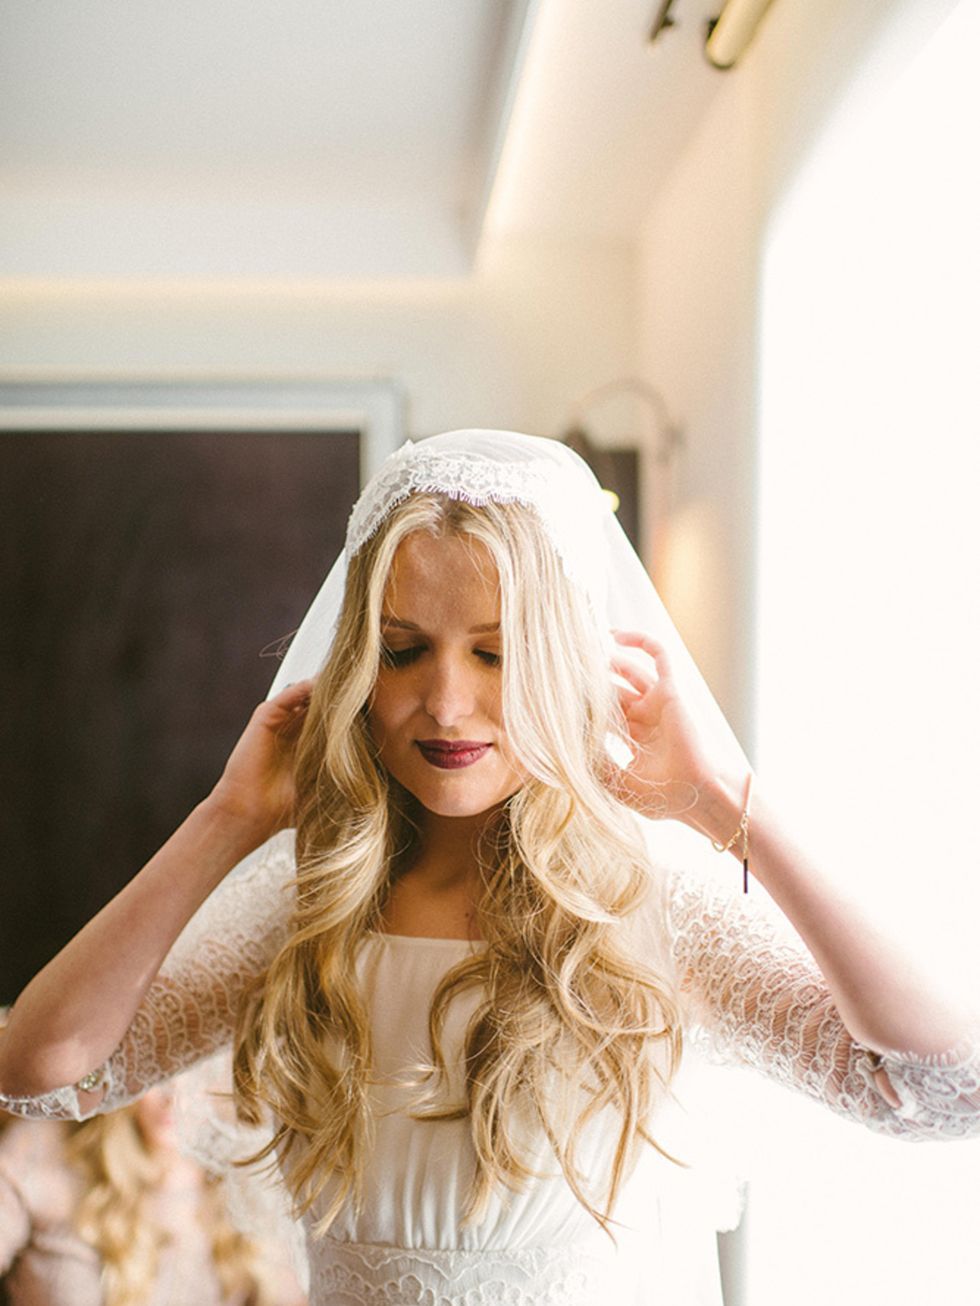 <p>My veil was from my dress shop (Luellas Boudoir). I wanted something with a vintage feel and had picked this style out before I found the dress - luckily they worked really well together.</p>